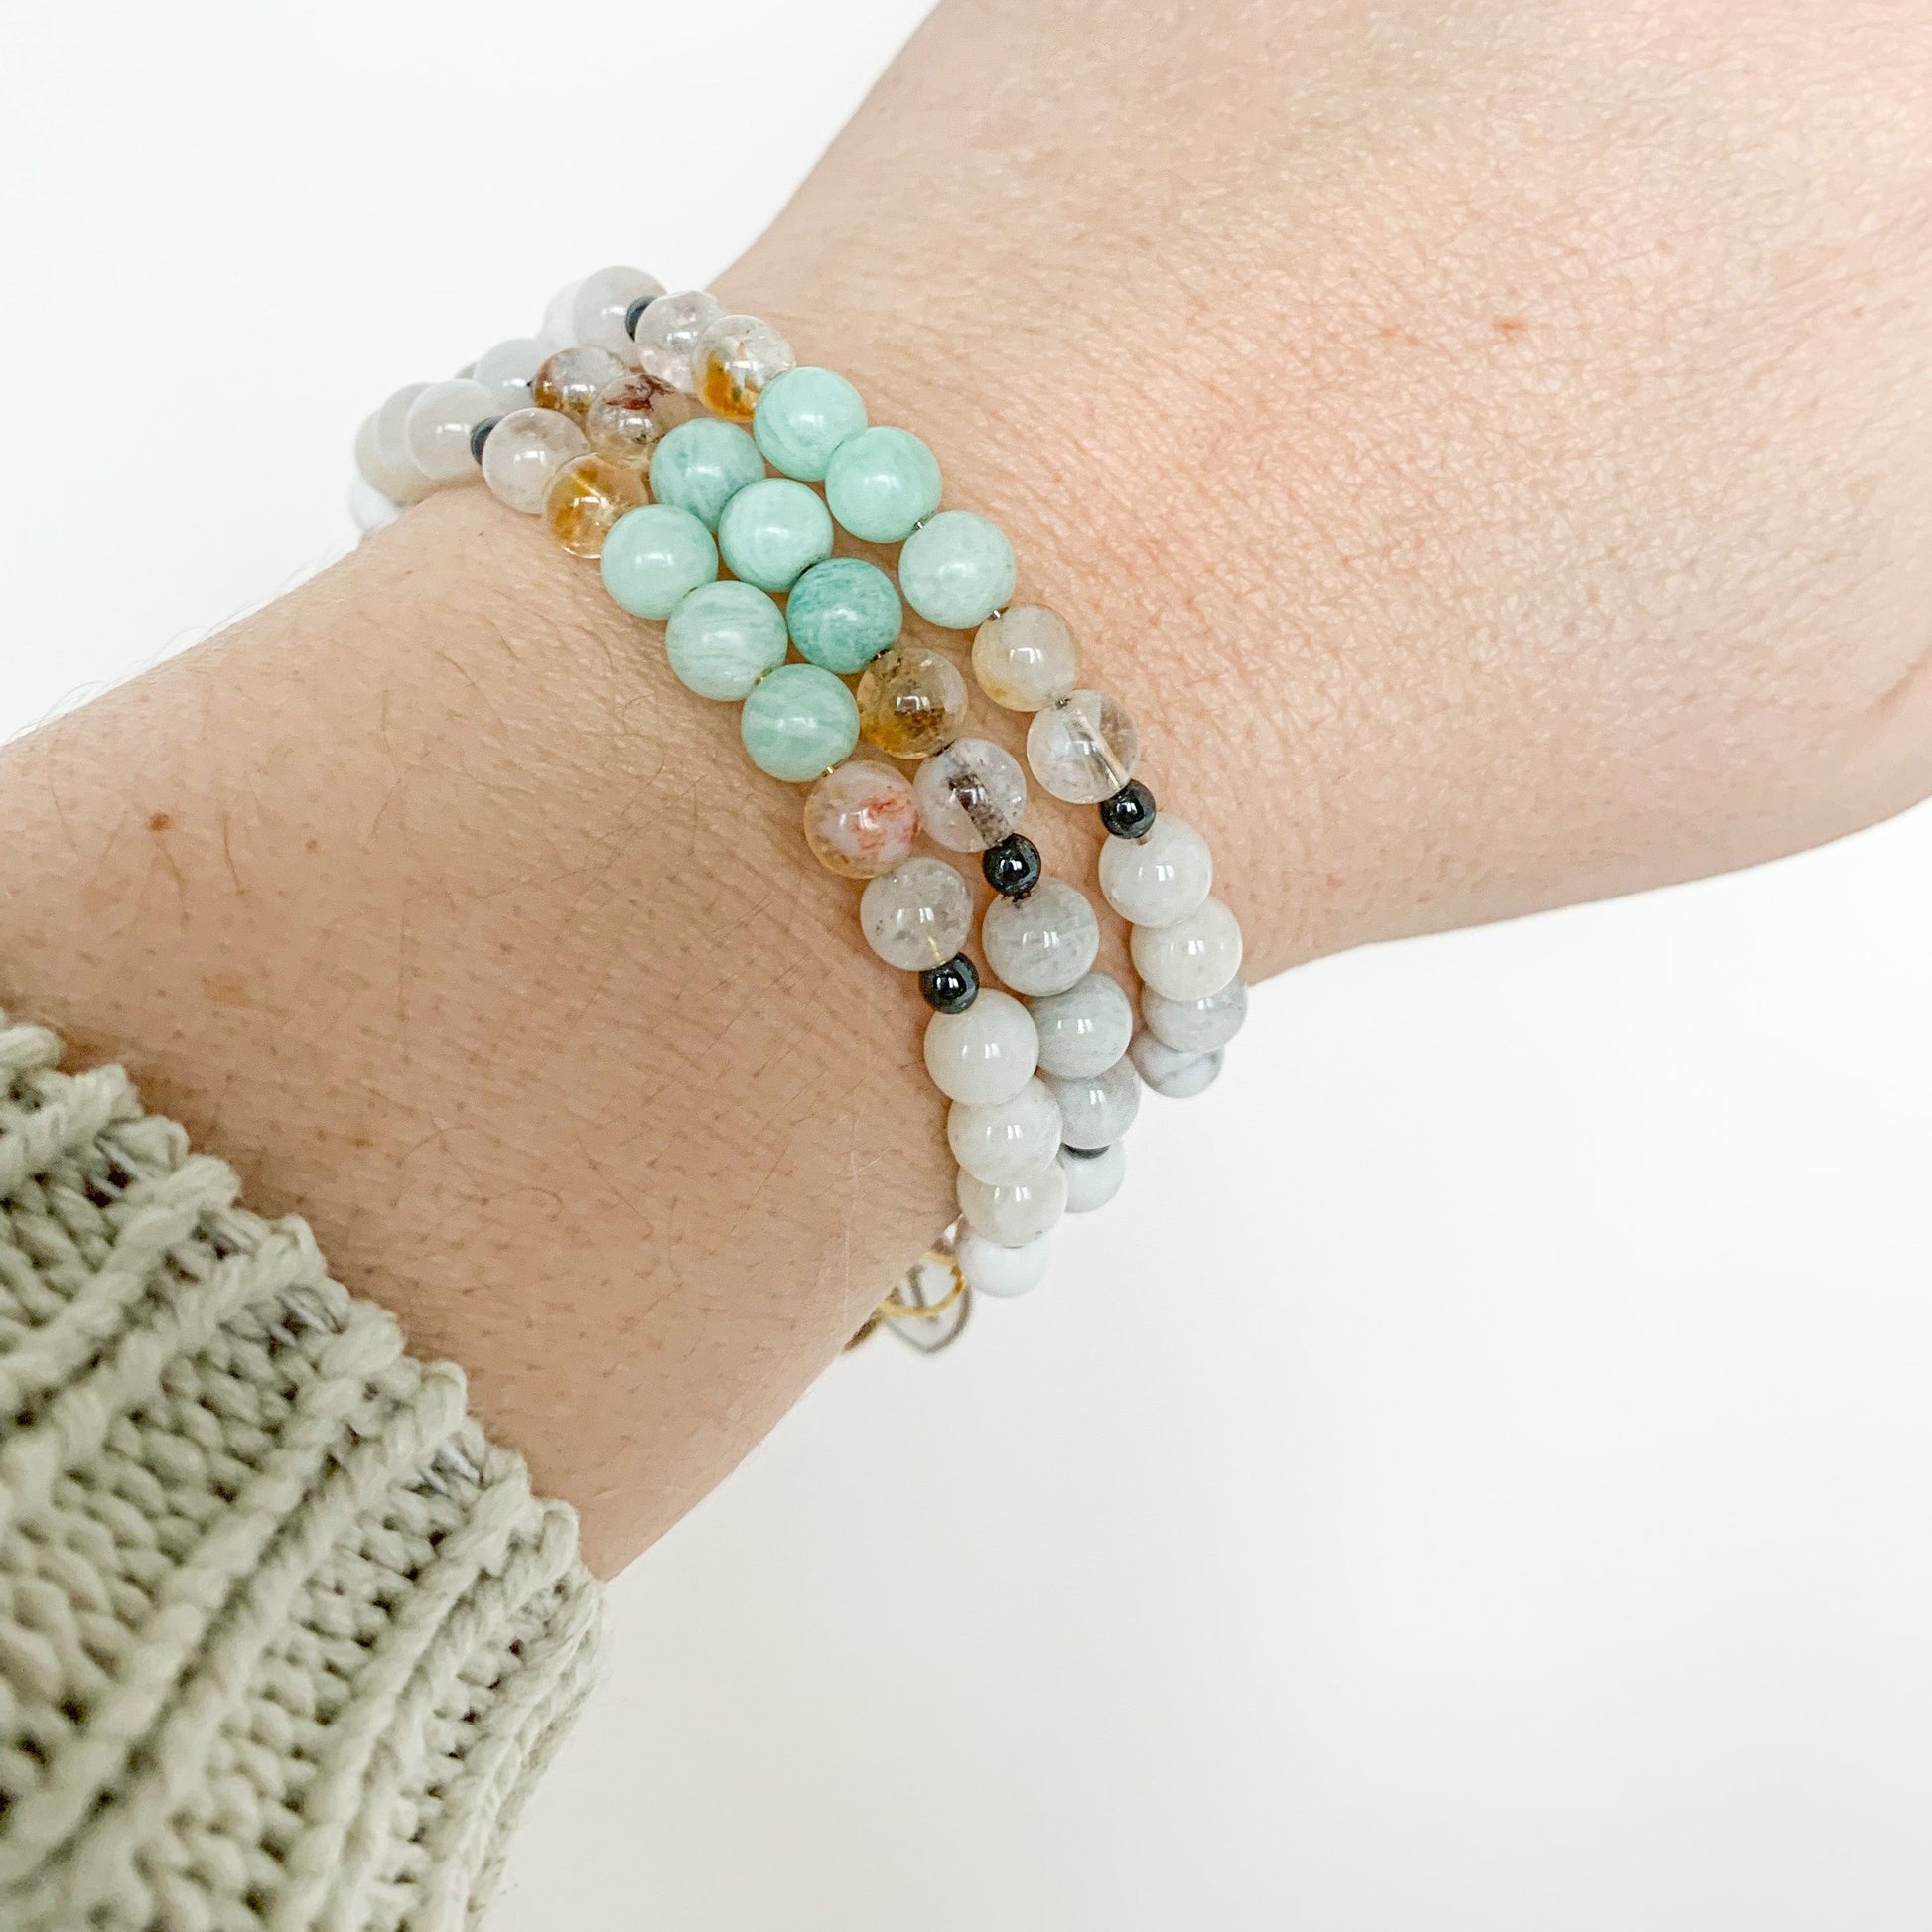 Stack of Gemini Bracelets, illustrating the blend for empowerment and style.